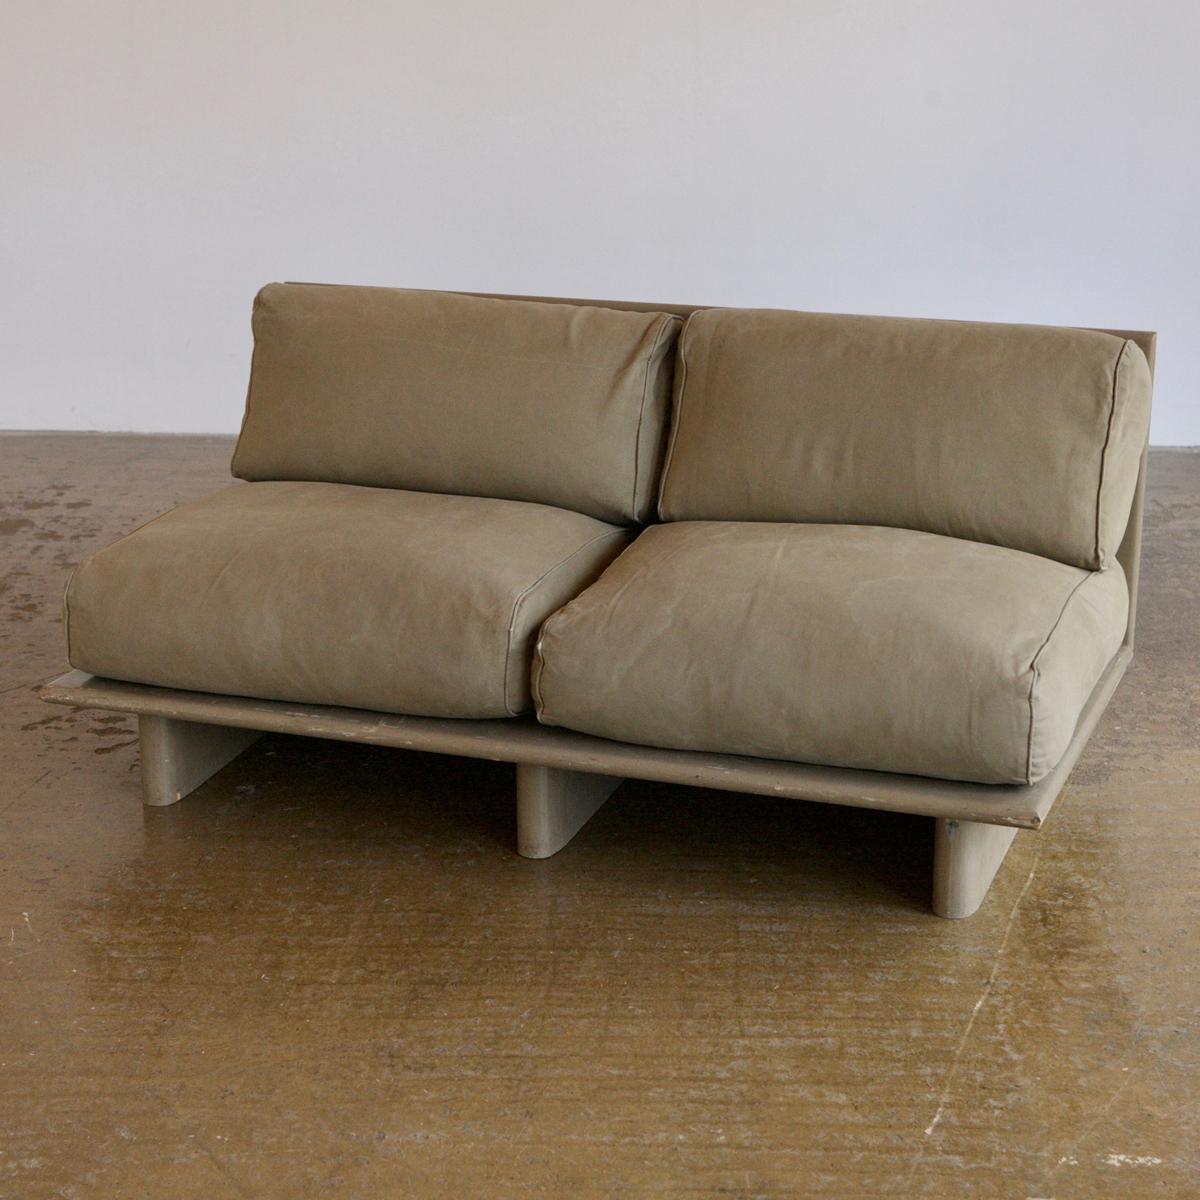 Giant feather stuffed cushions make up the seats for this excellent minimalist sofa from 1980's France. It's has a futon style construction but isn't too low and is incredibly comfortable. The frame matches the cotton twill fabric in a muted khaki